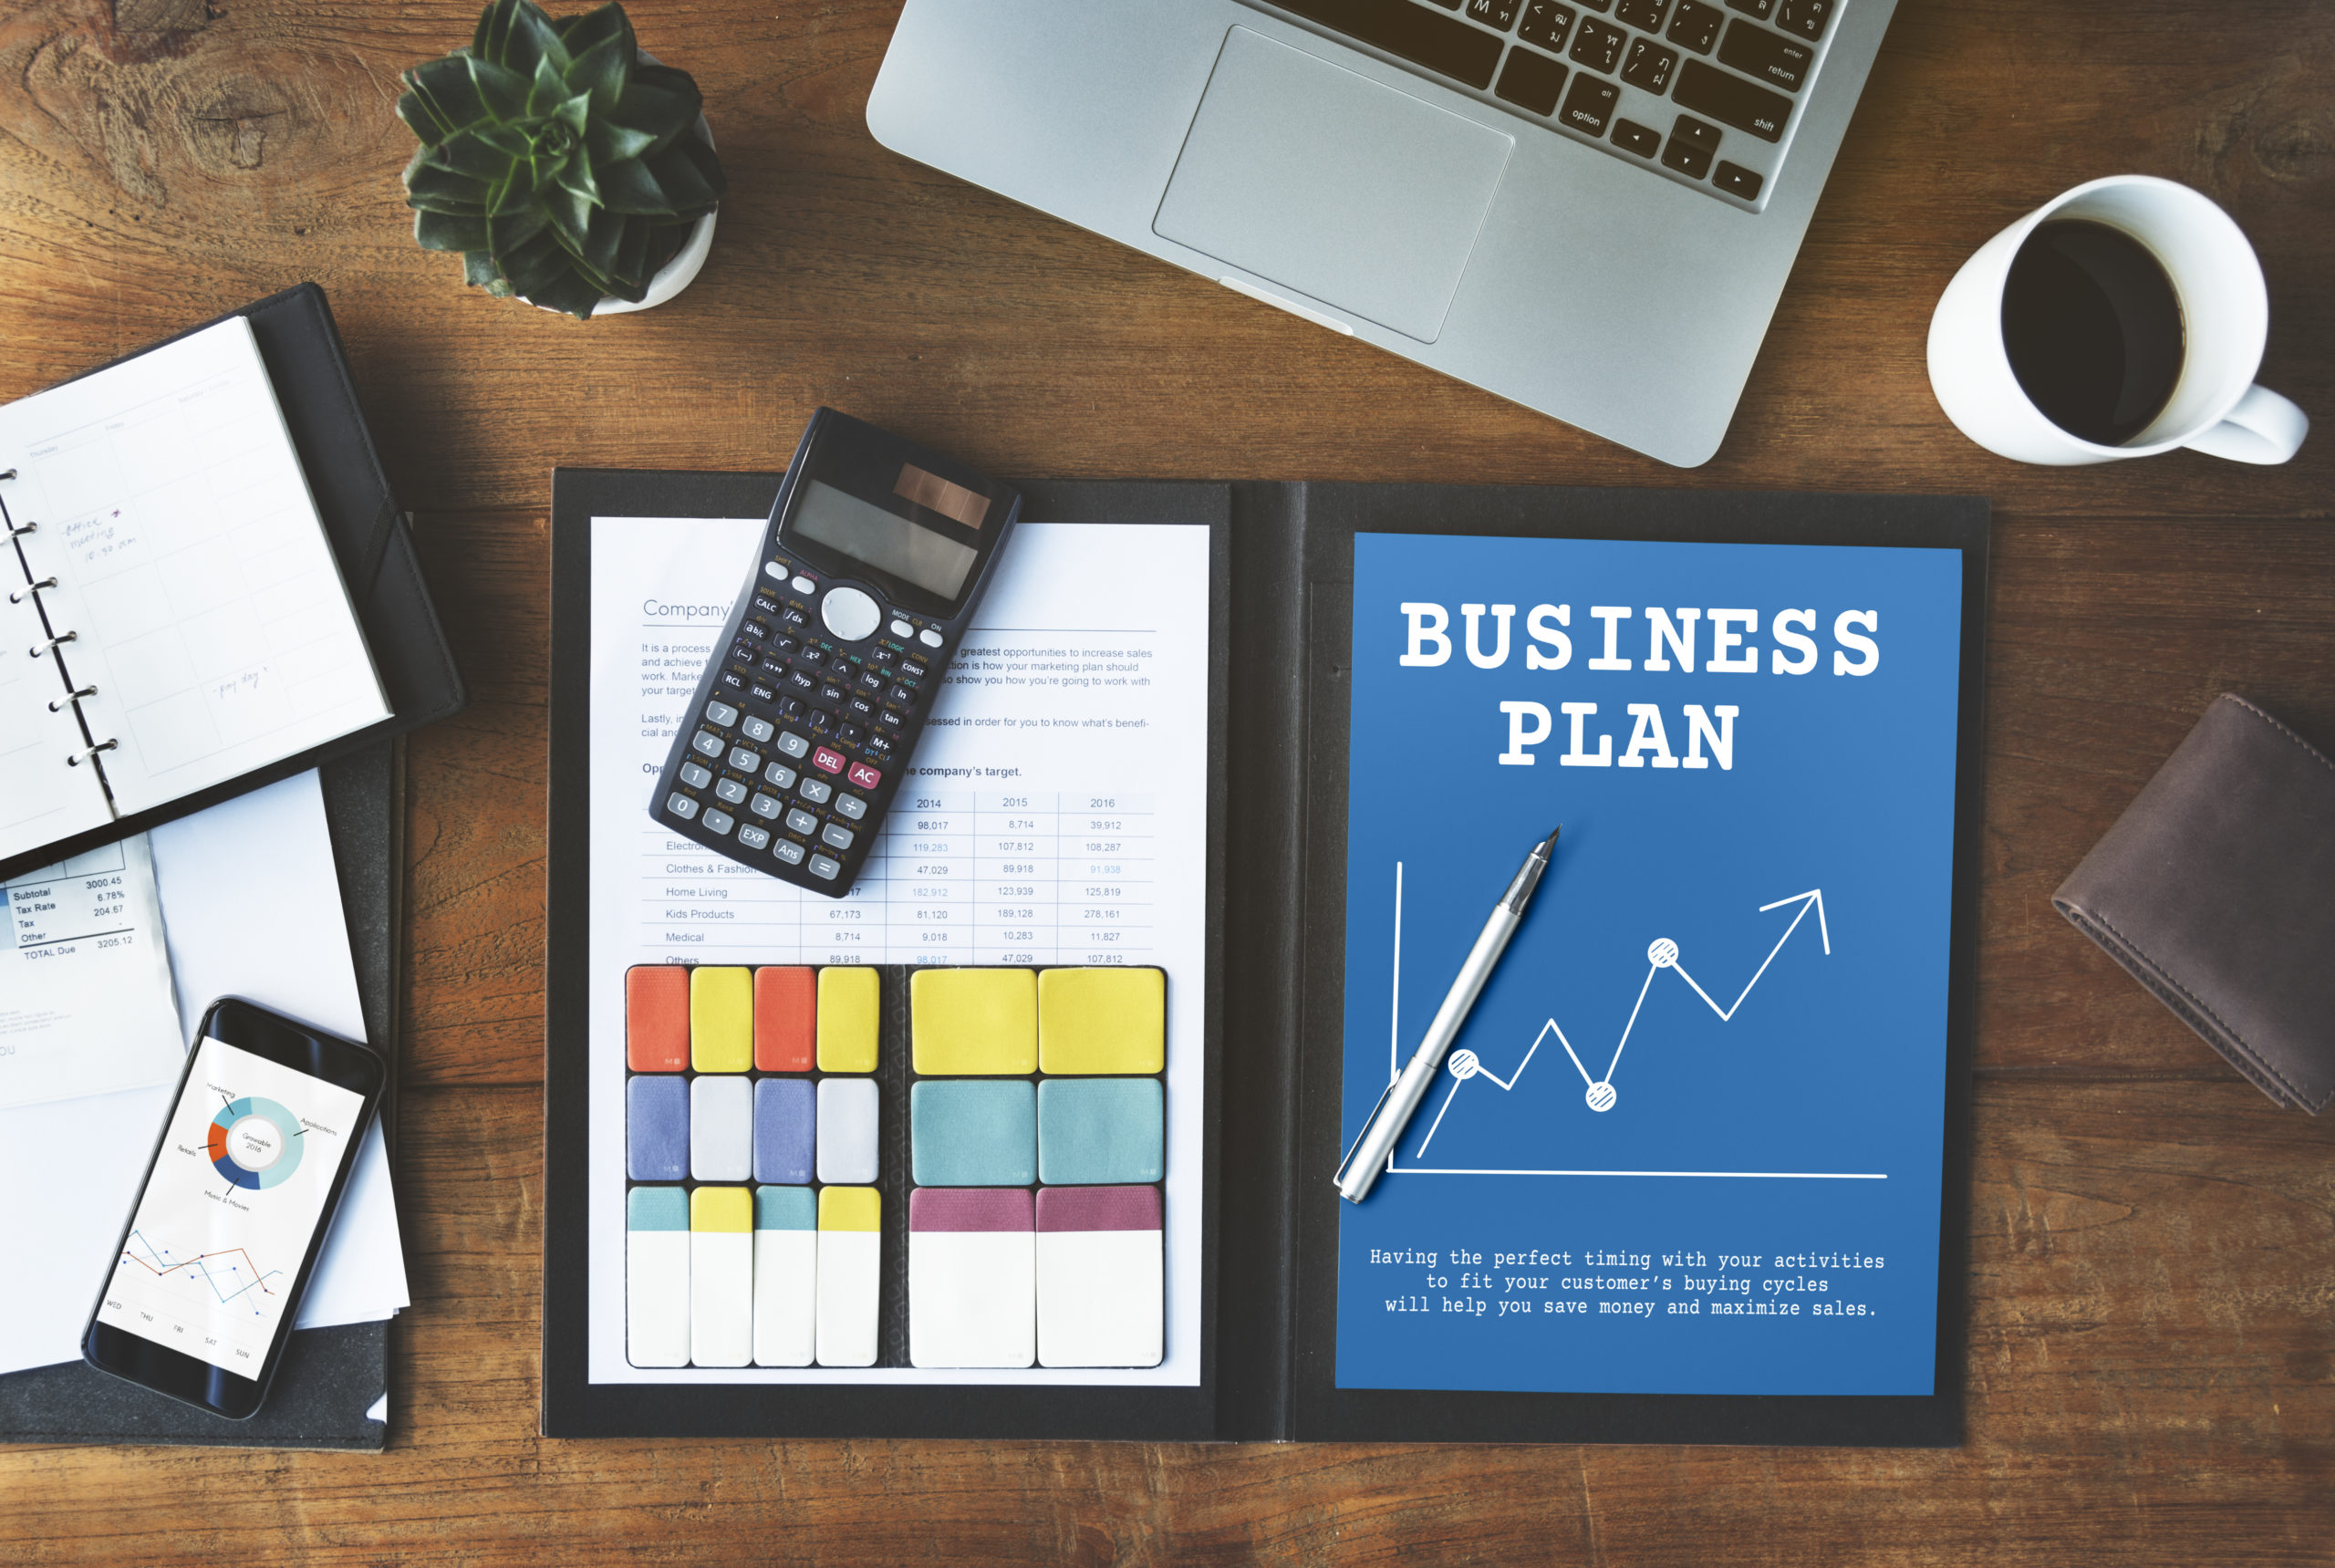 Successful Business/ objectives of a business plan